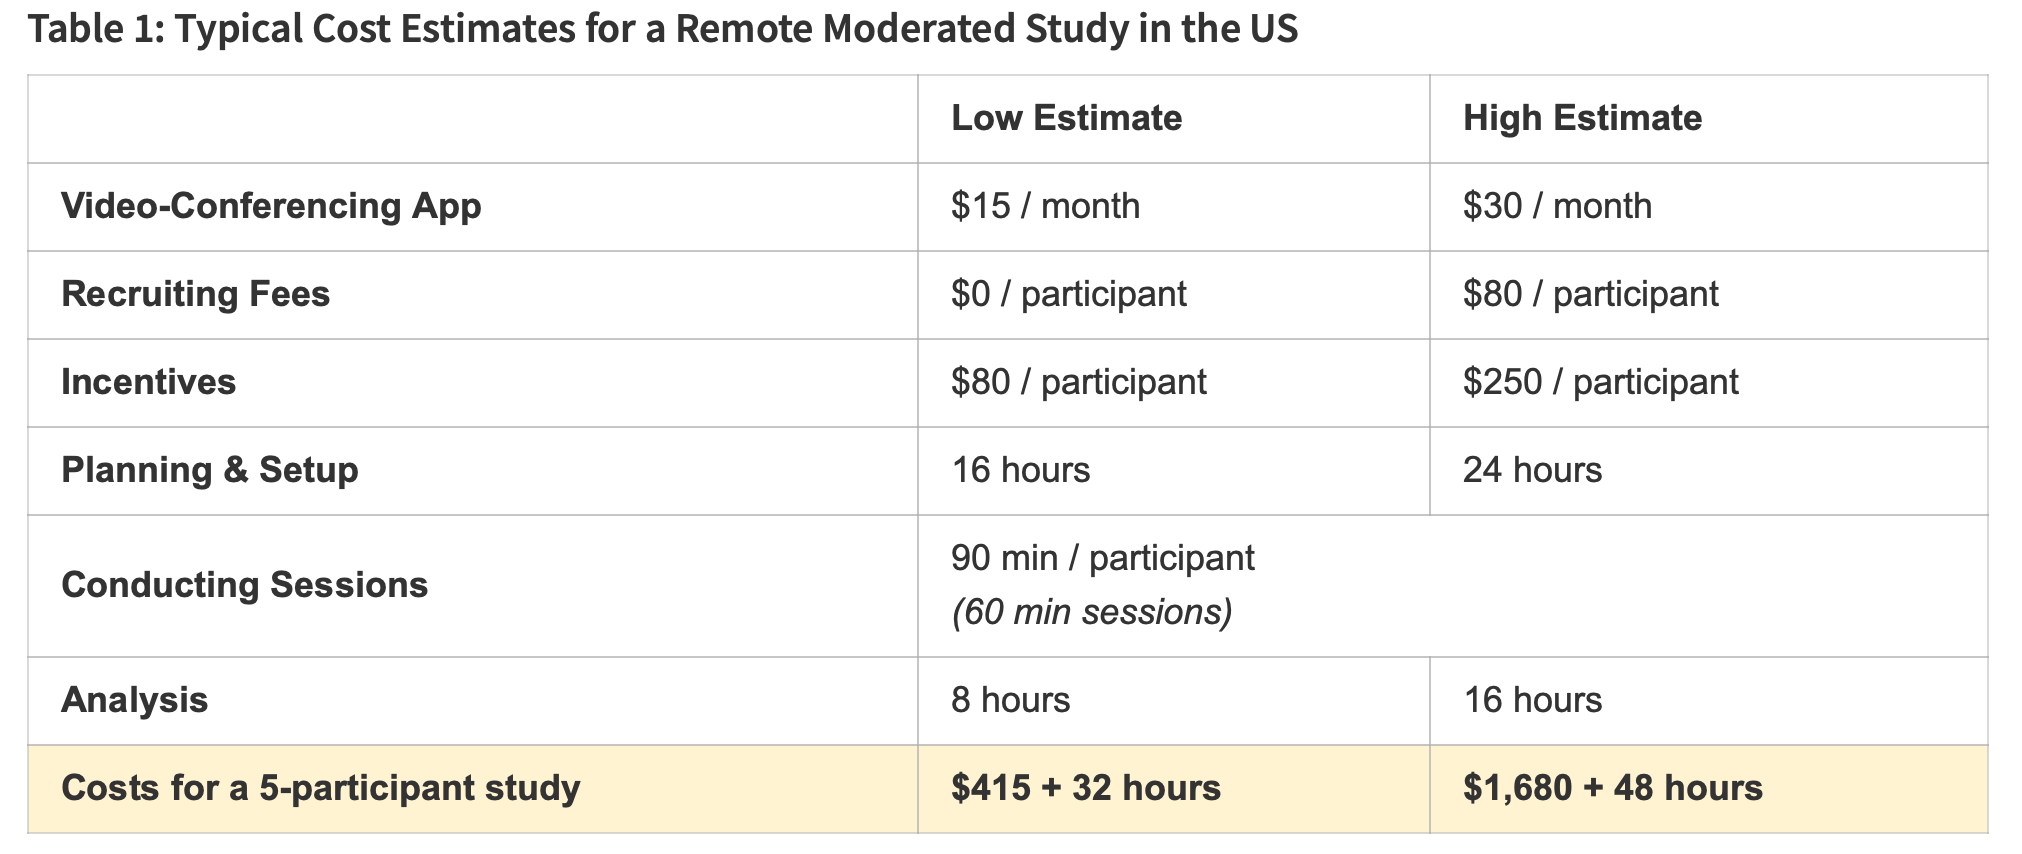 Typical Cost Estimates for a Remote Moderated Study in the US